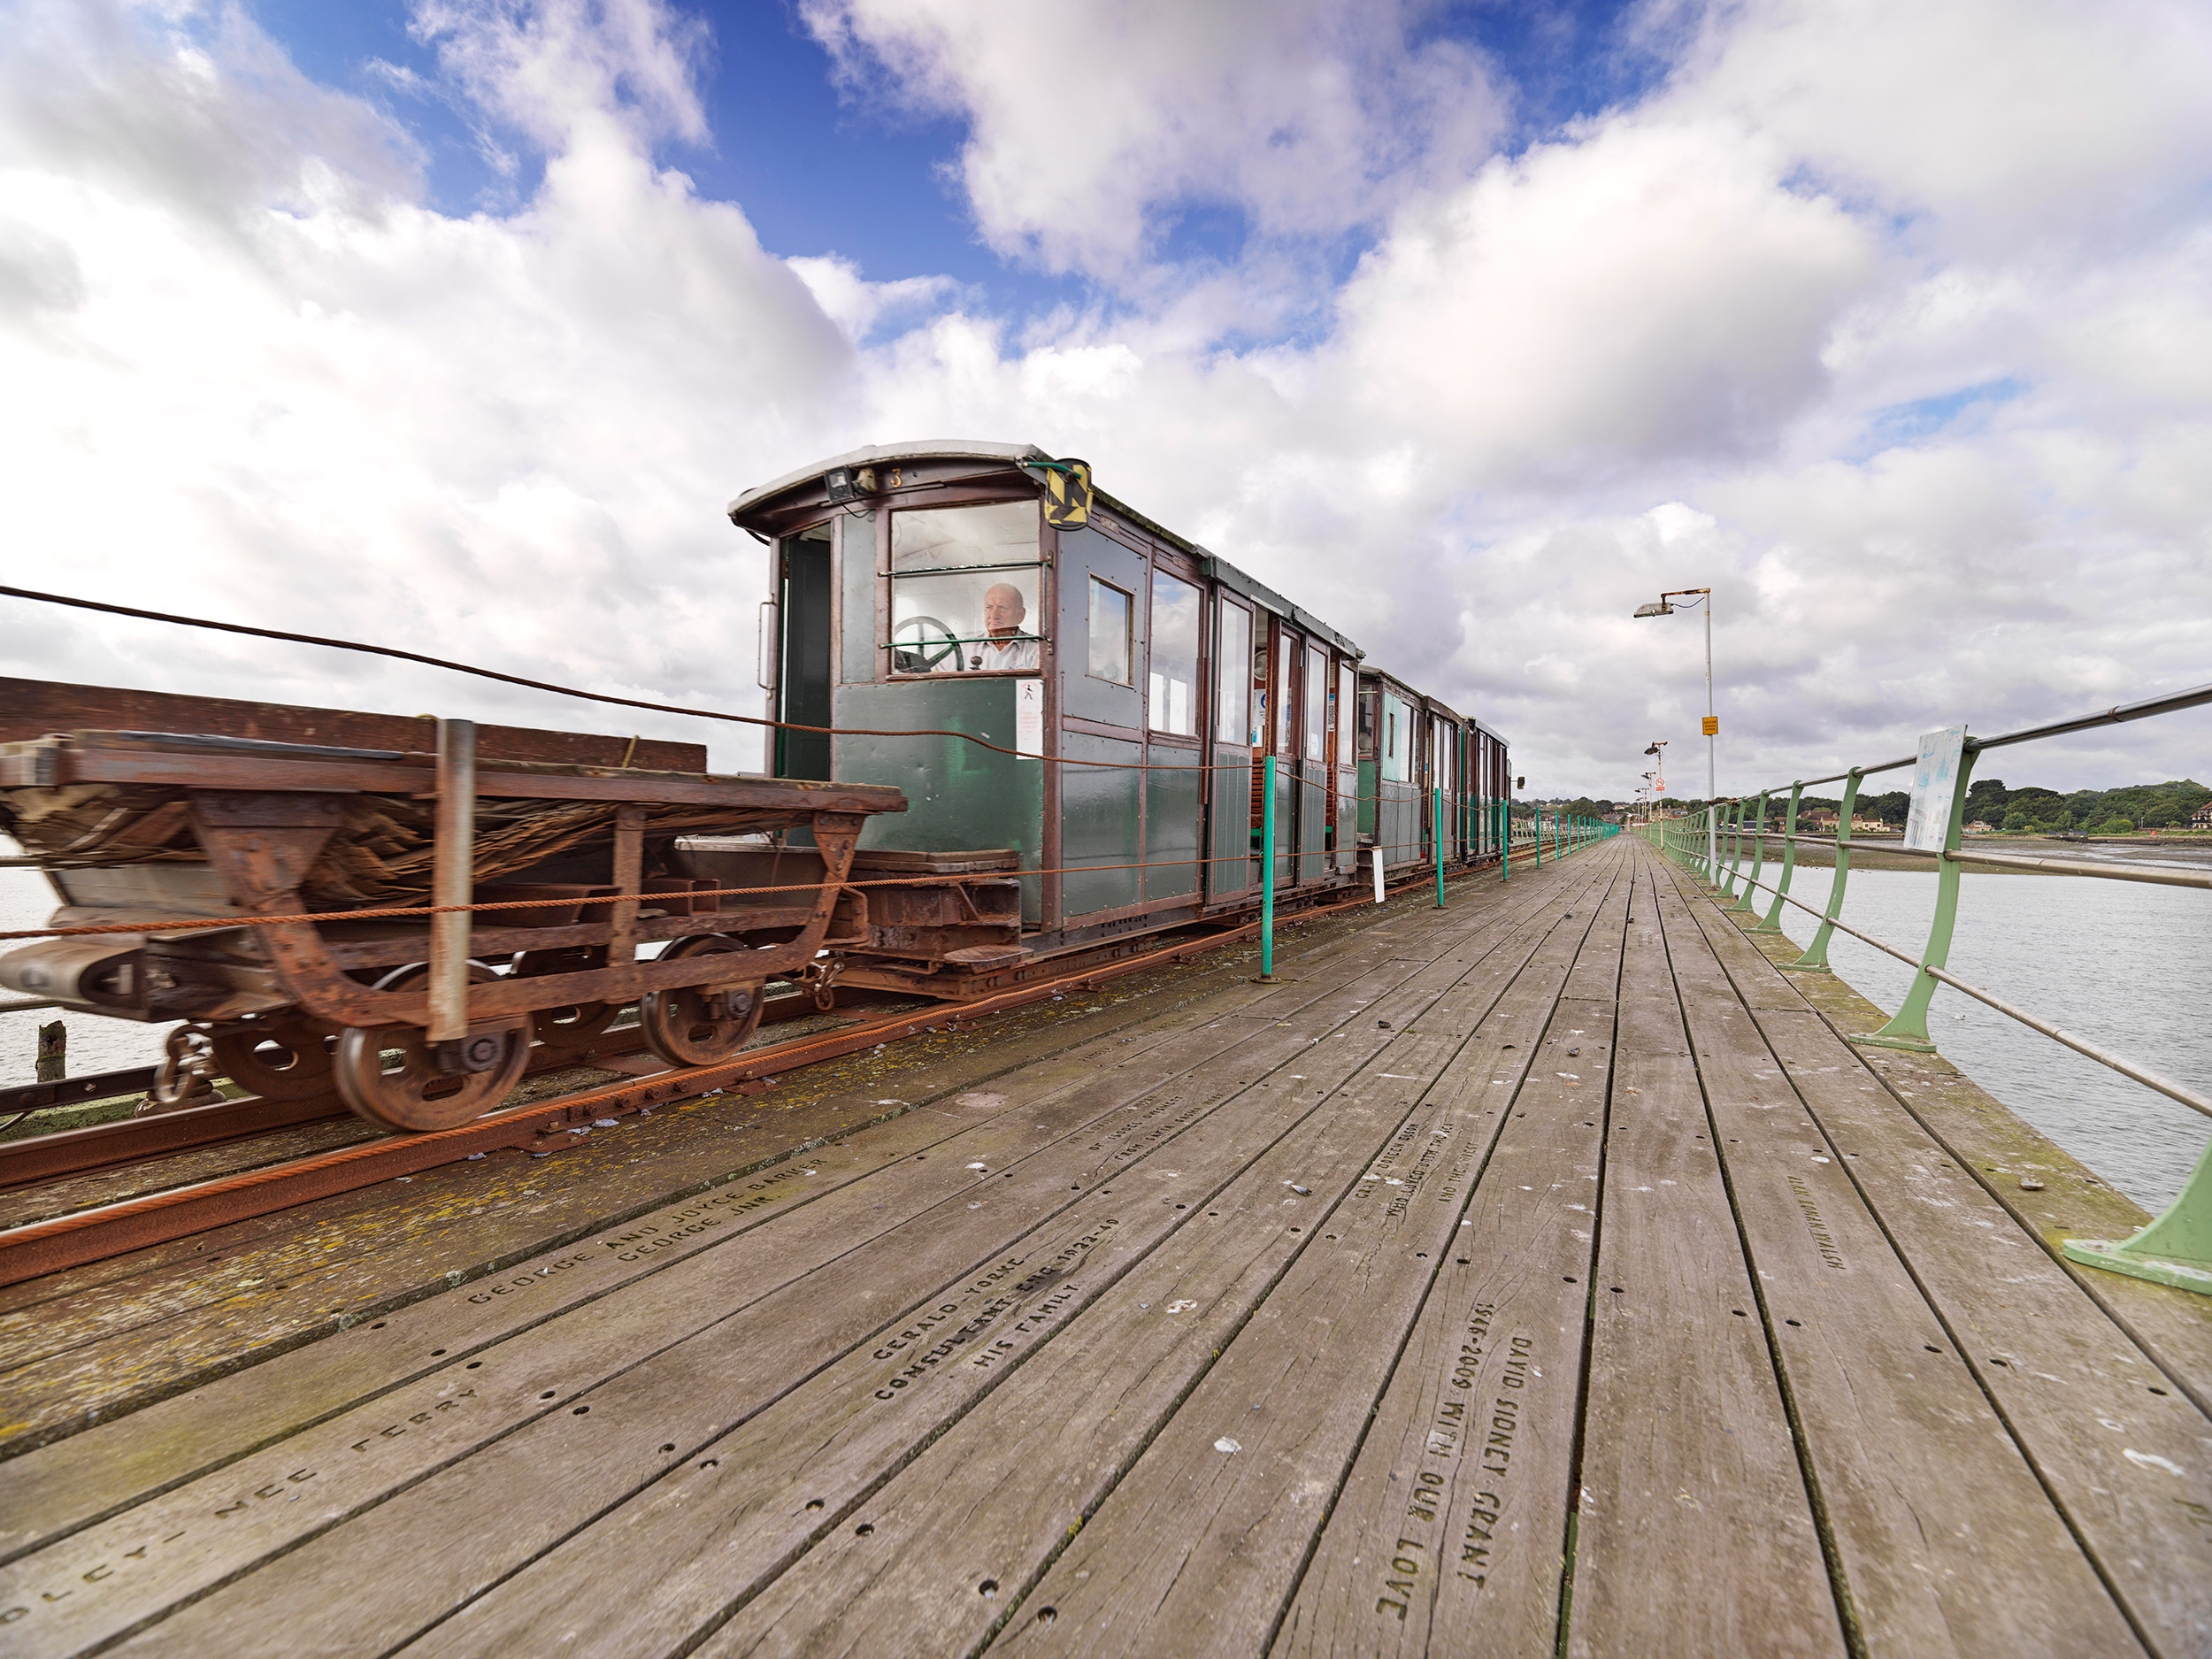 Photo along wooden pier with train on the tracks on the left and iron railing running down the right hand side.